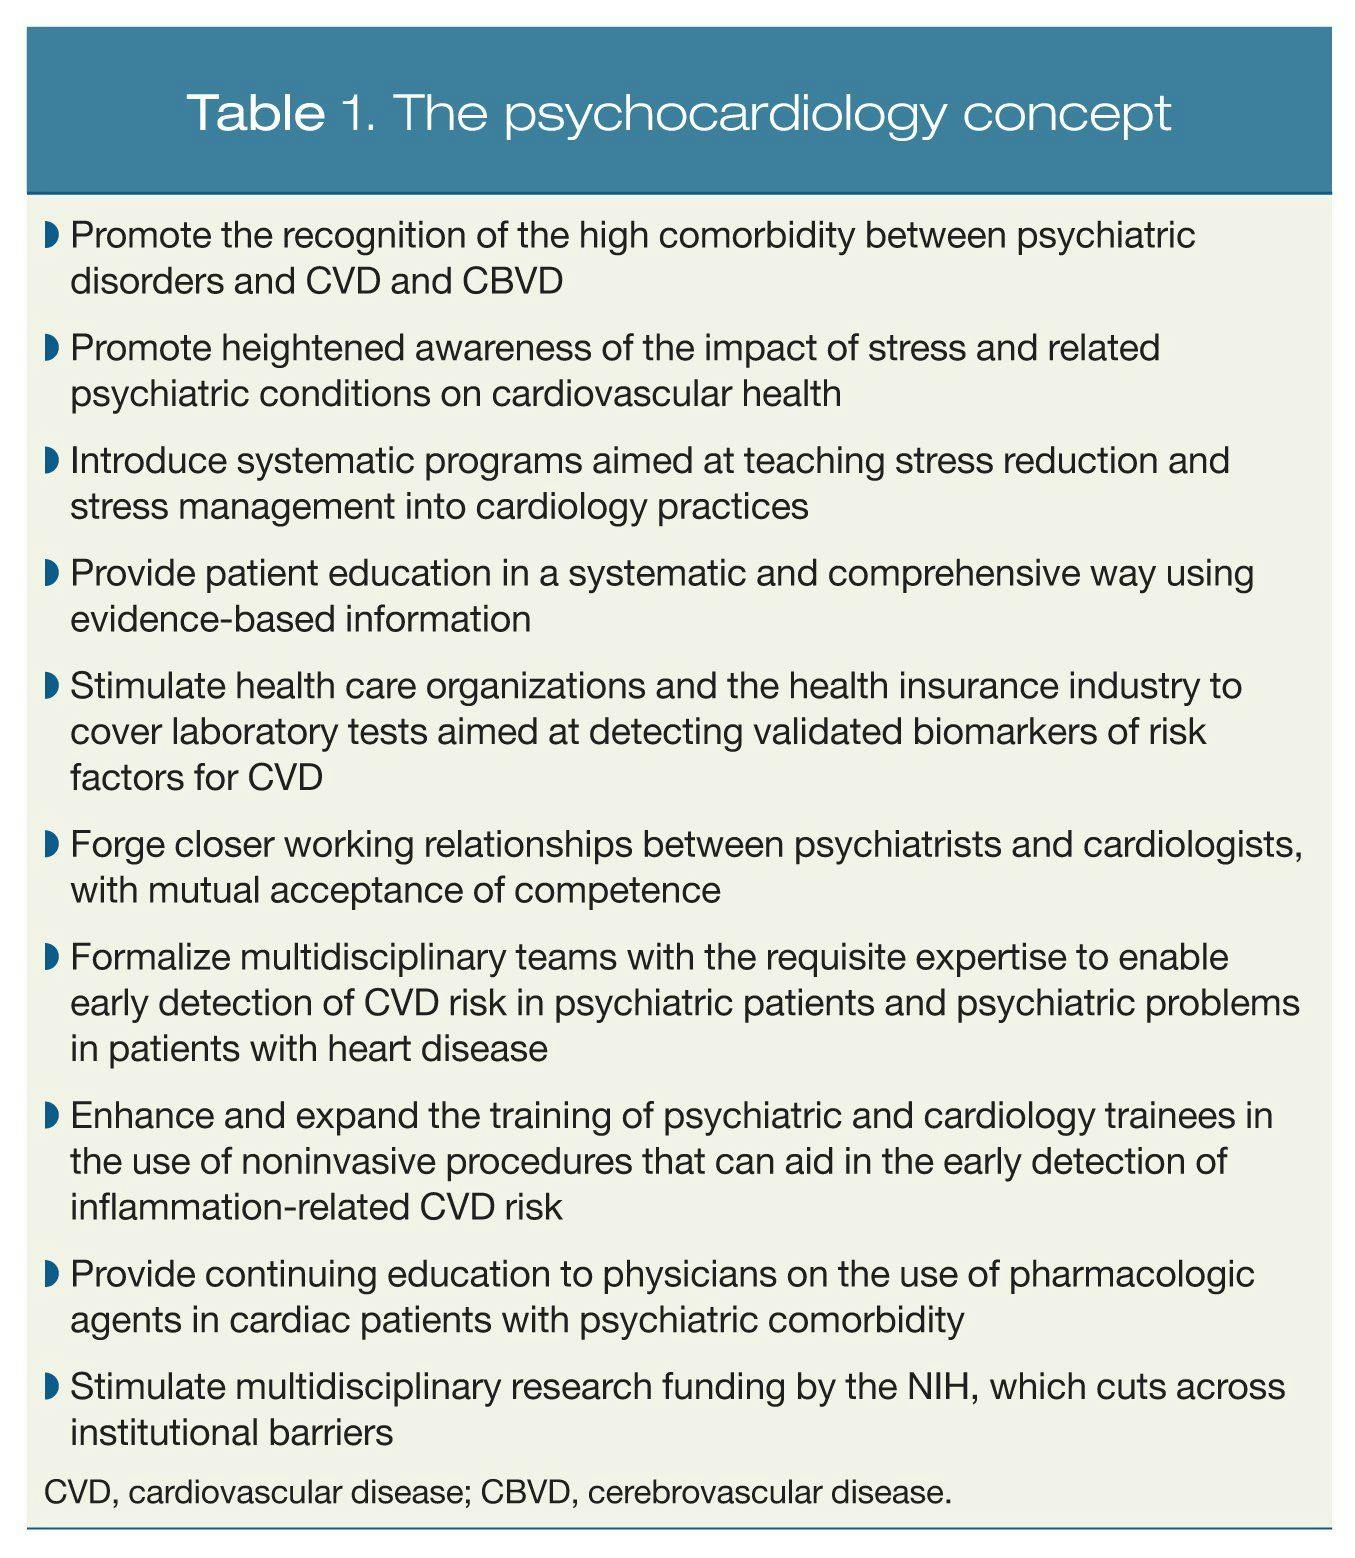 The psychocardiology concept